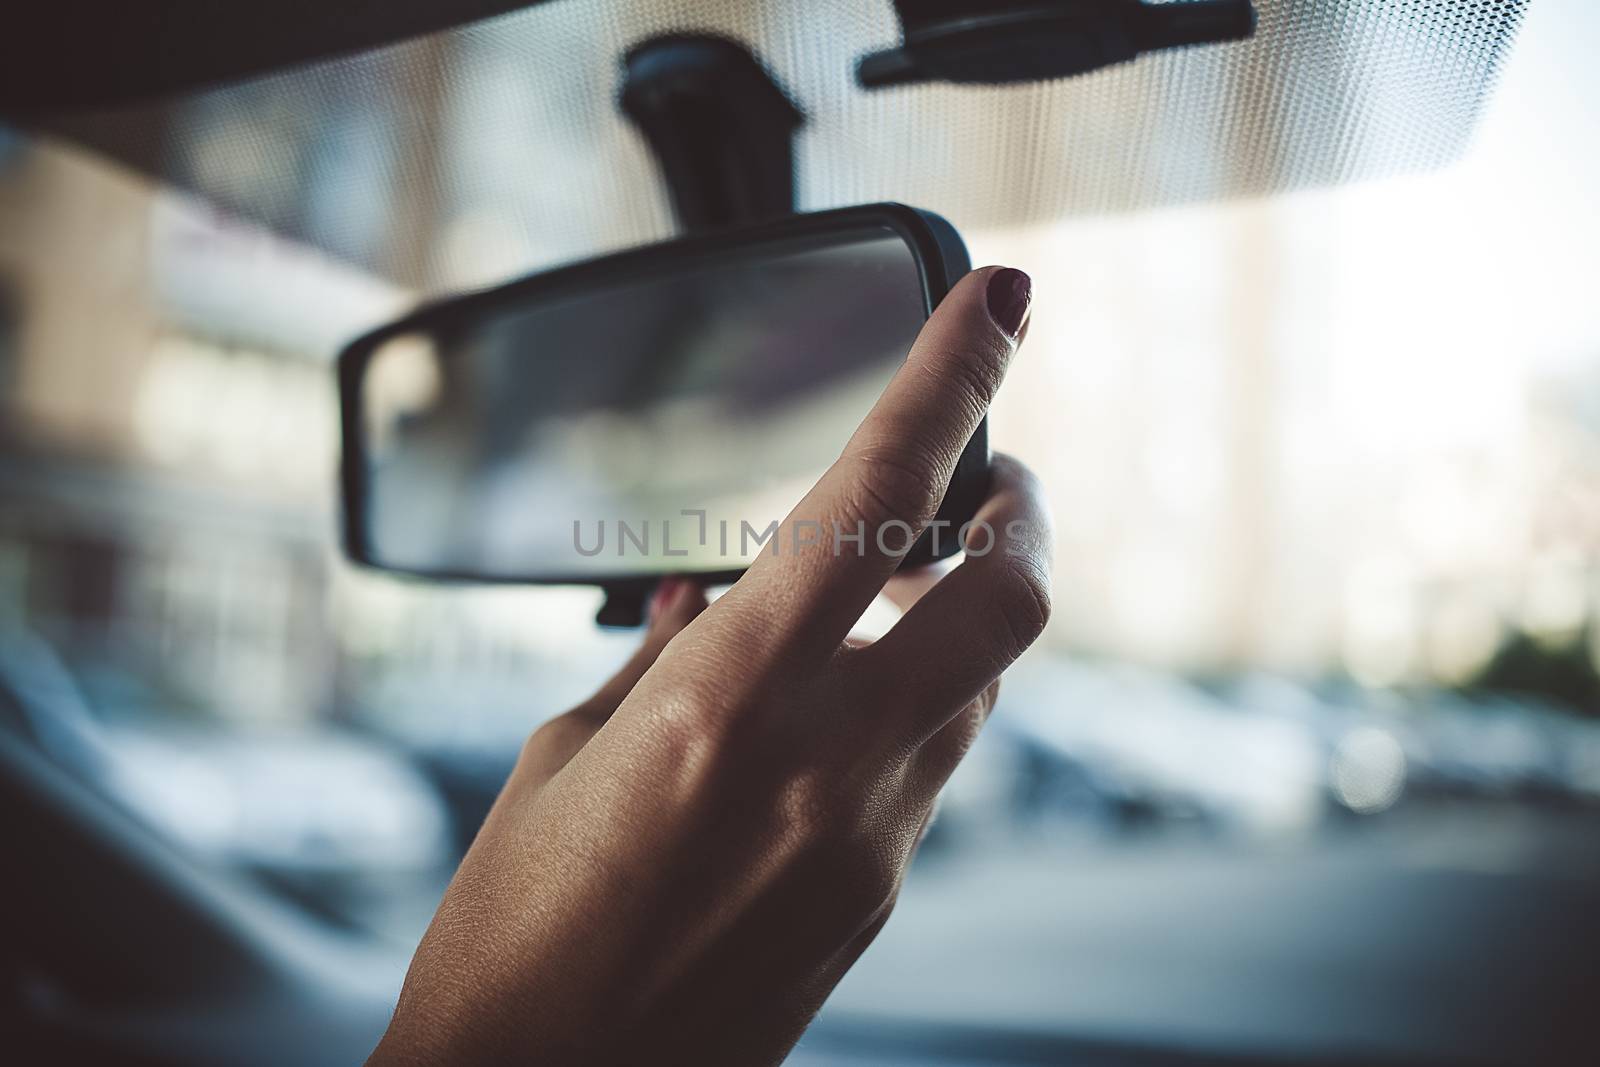 A man is driving a rear-view mirror in the car